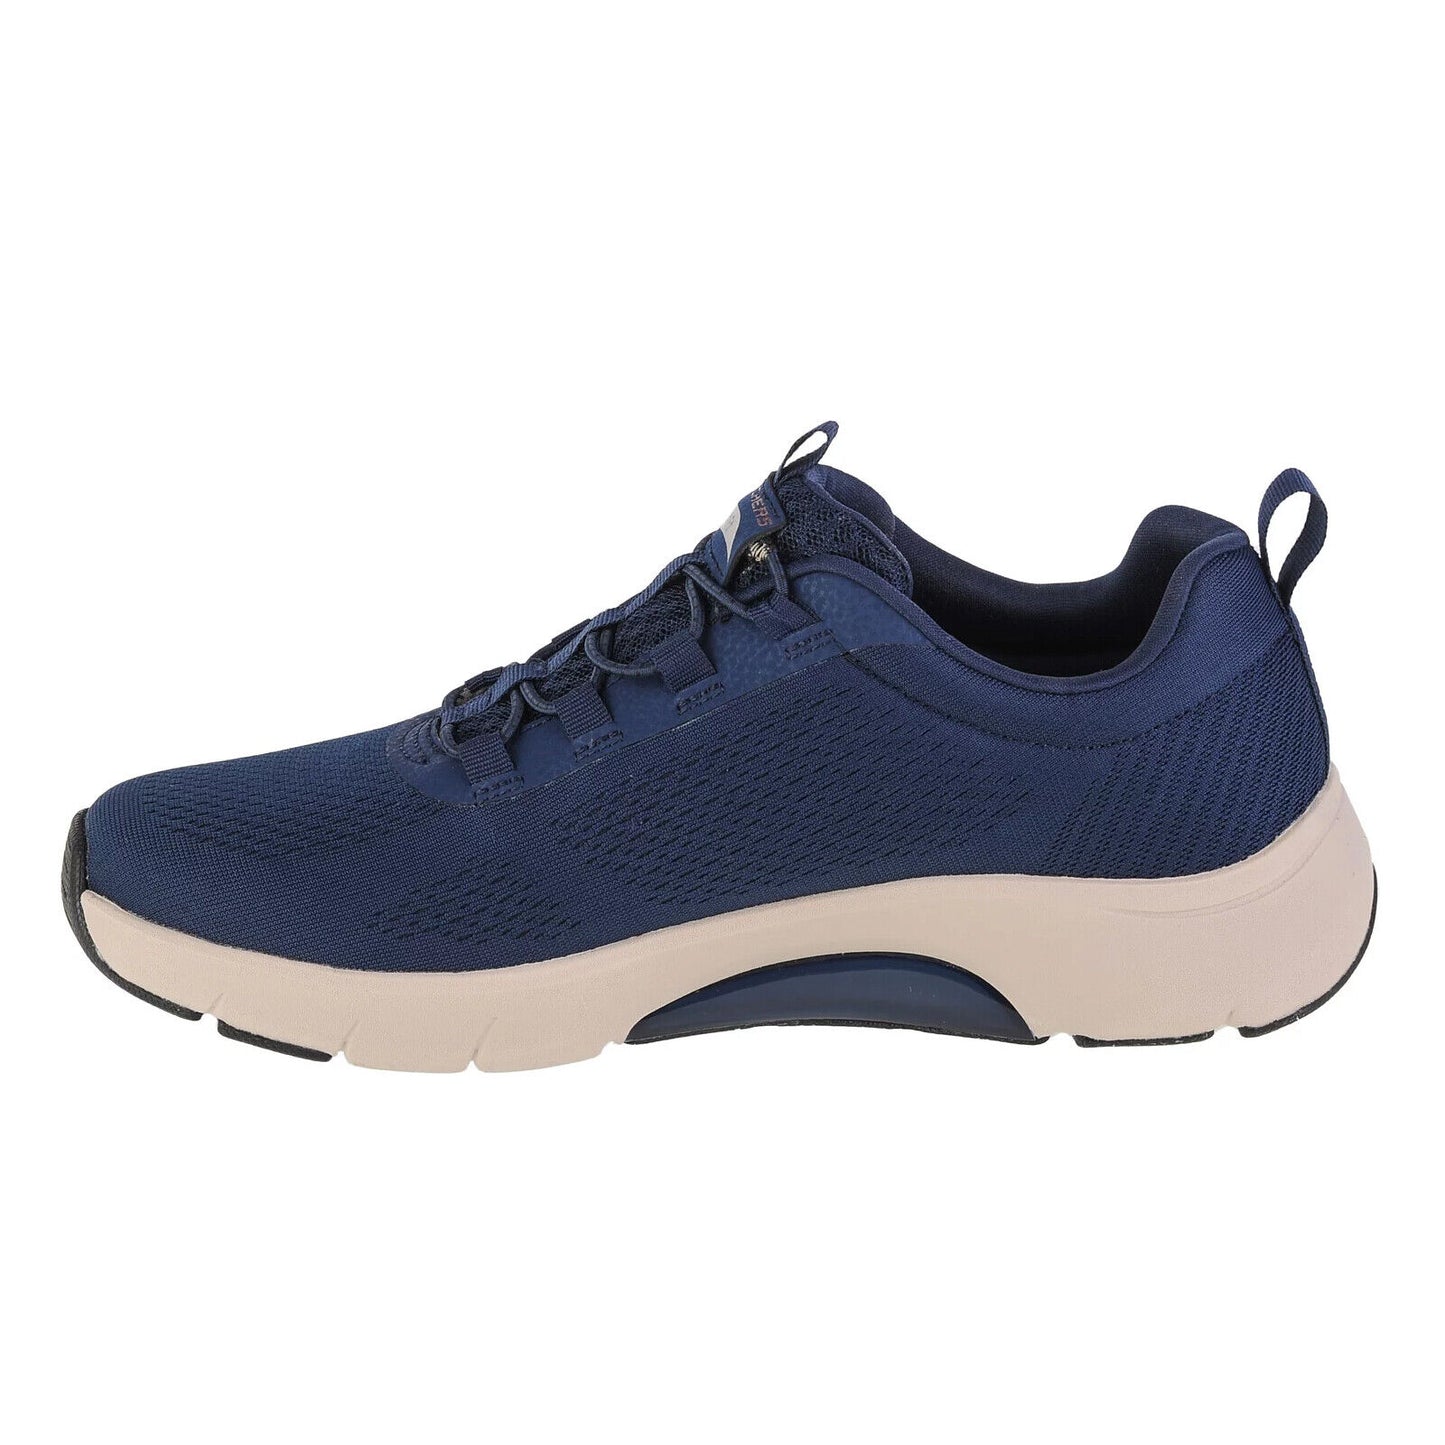 Skechers Mens Arch Fit Billo Navy Mesh Lightweight Vegan Trainers 232556/NVY